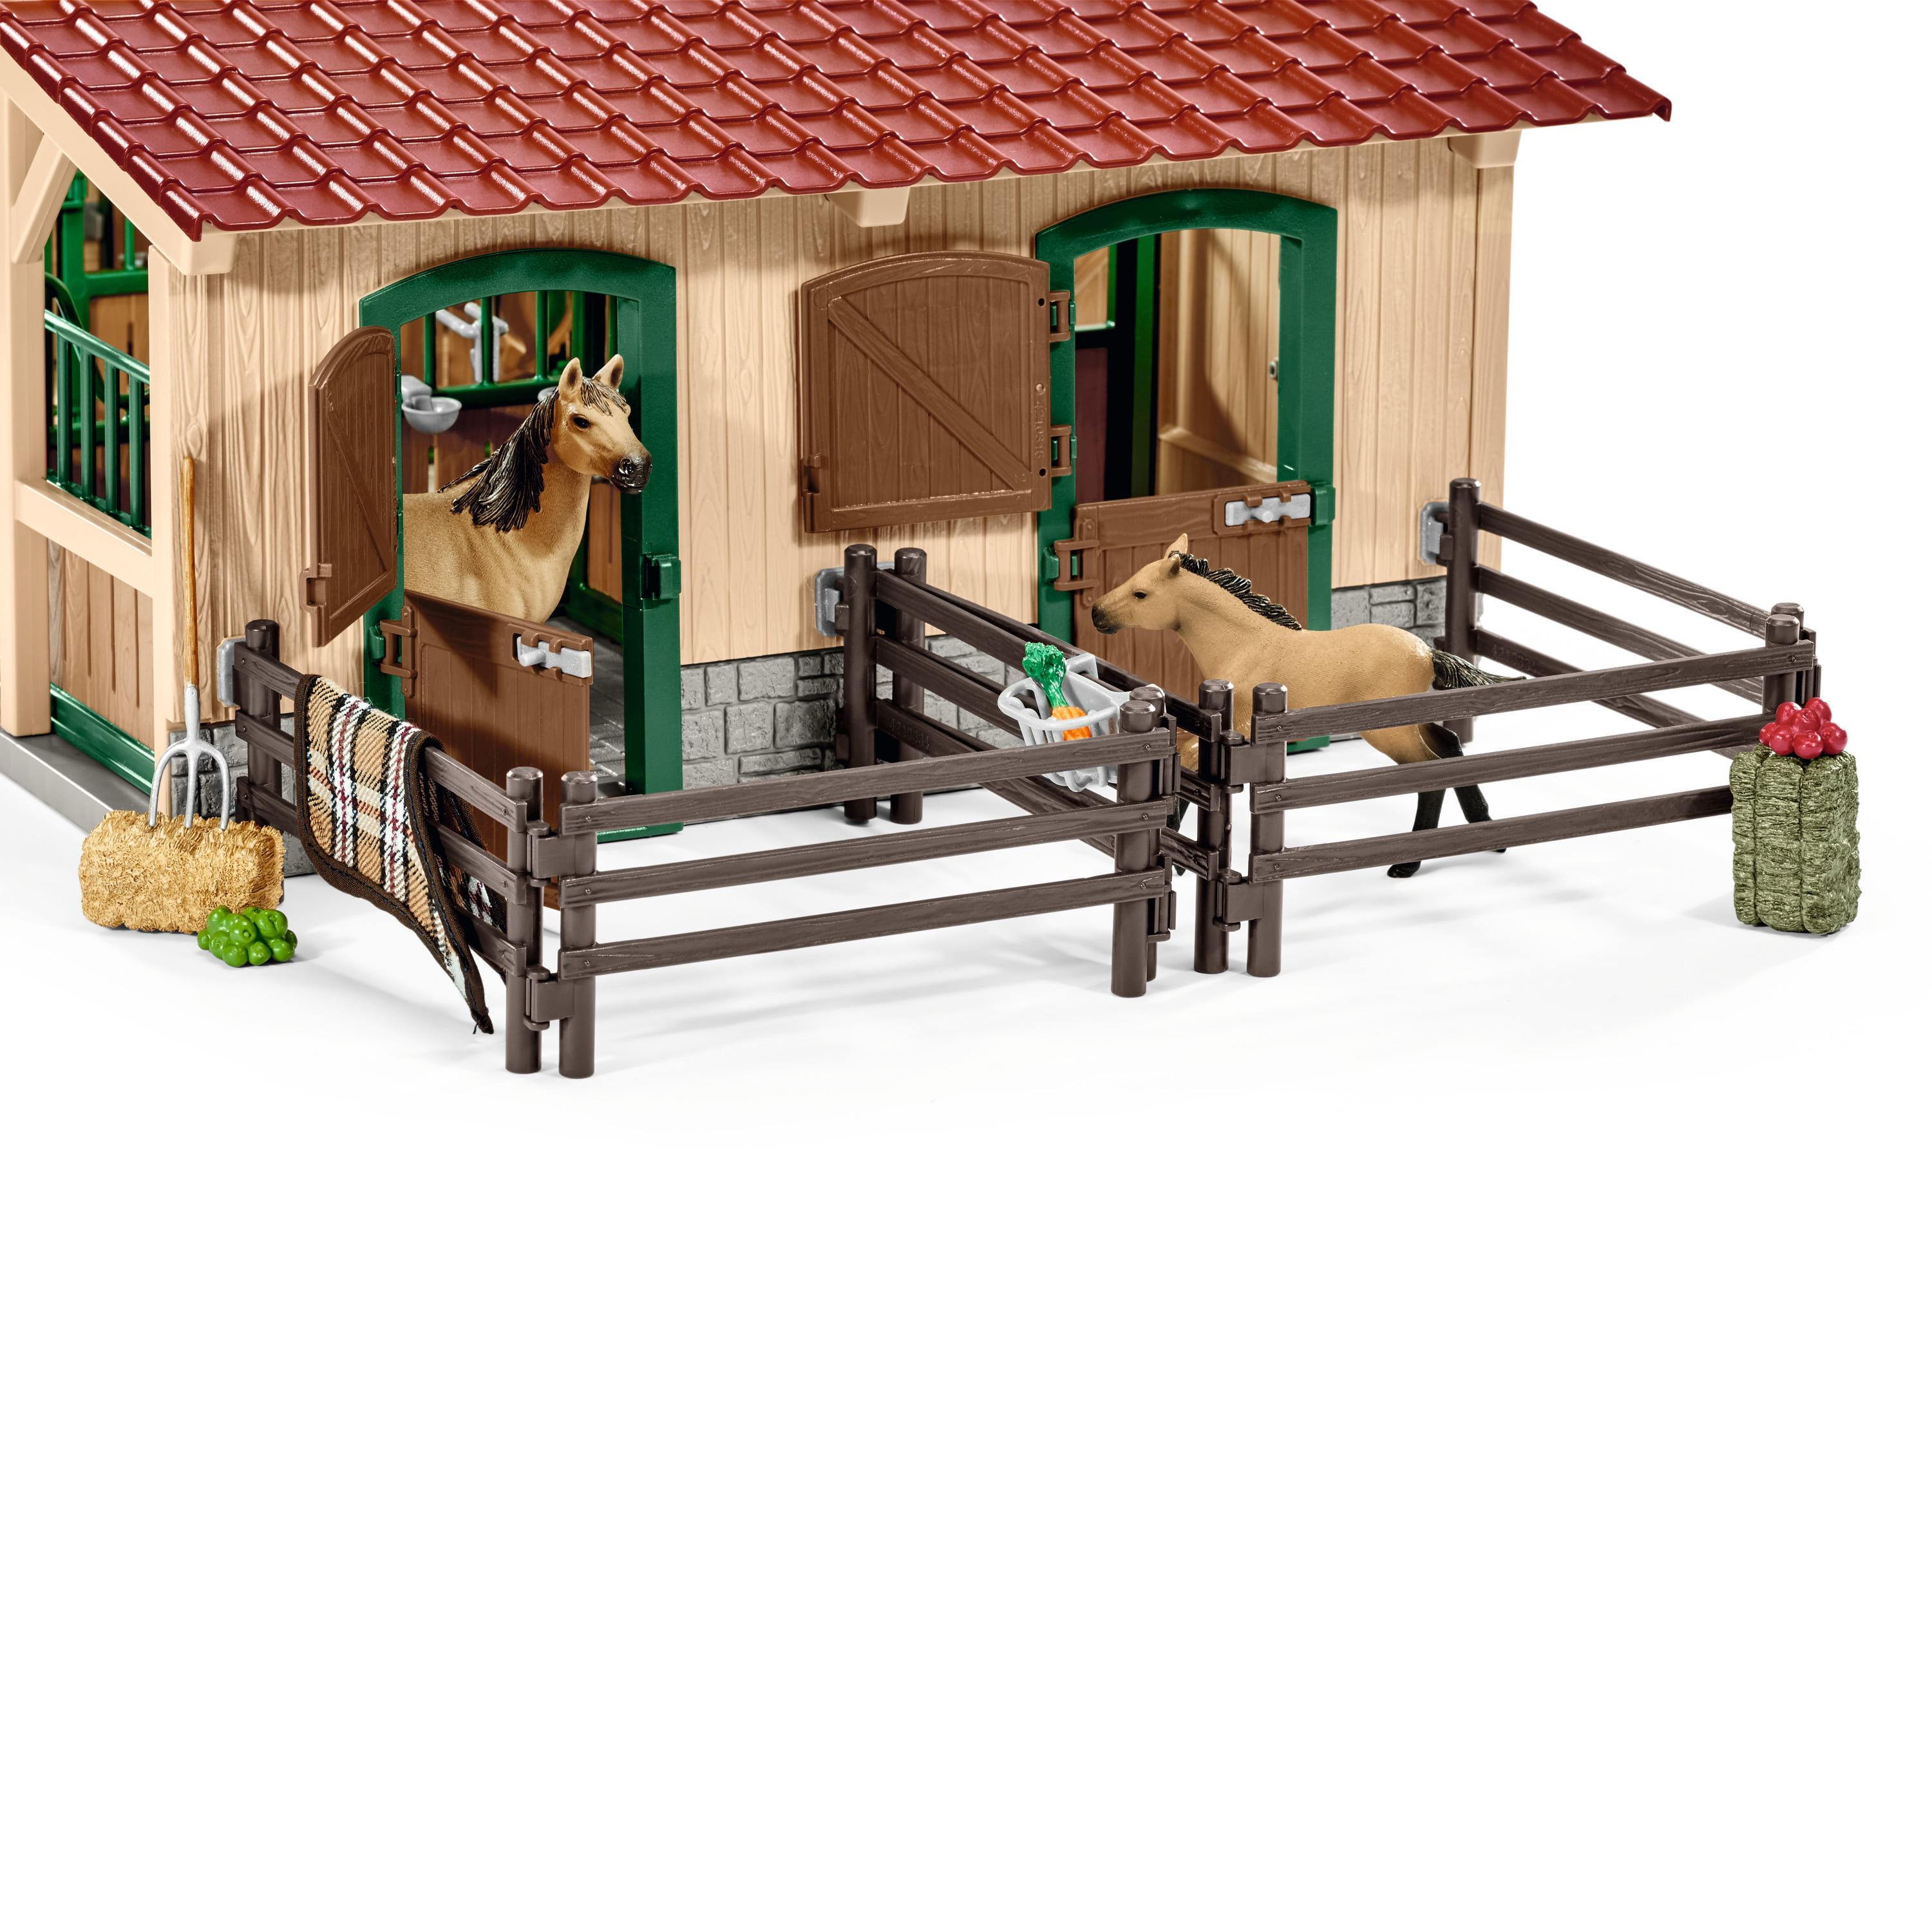 Stable and accessories - Walmart.com